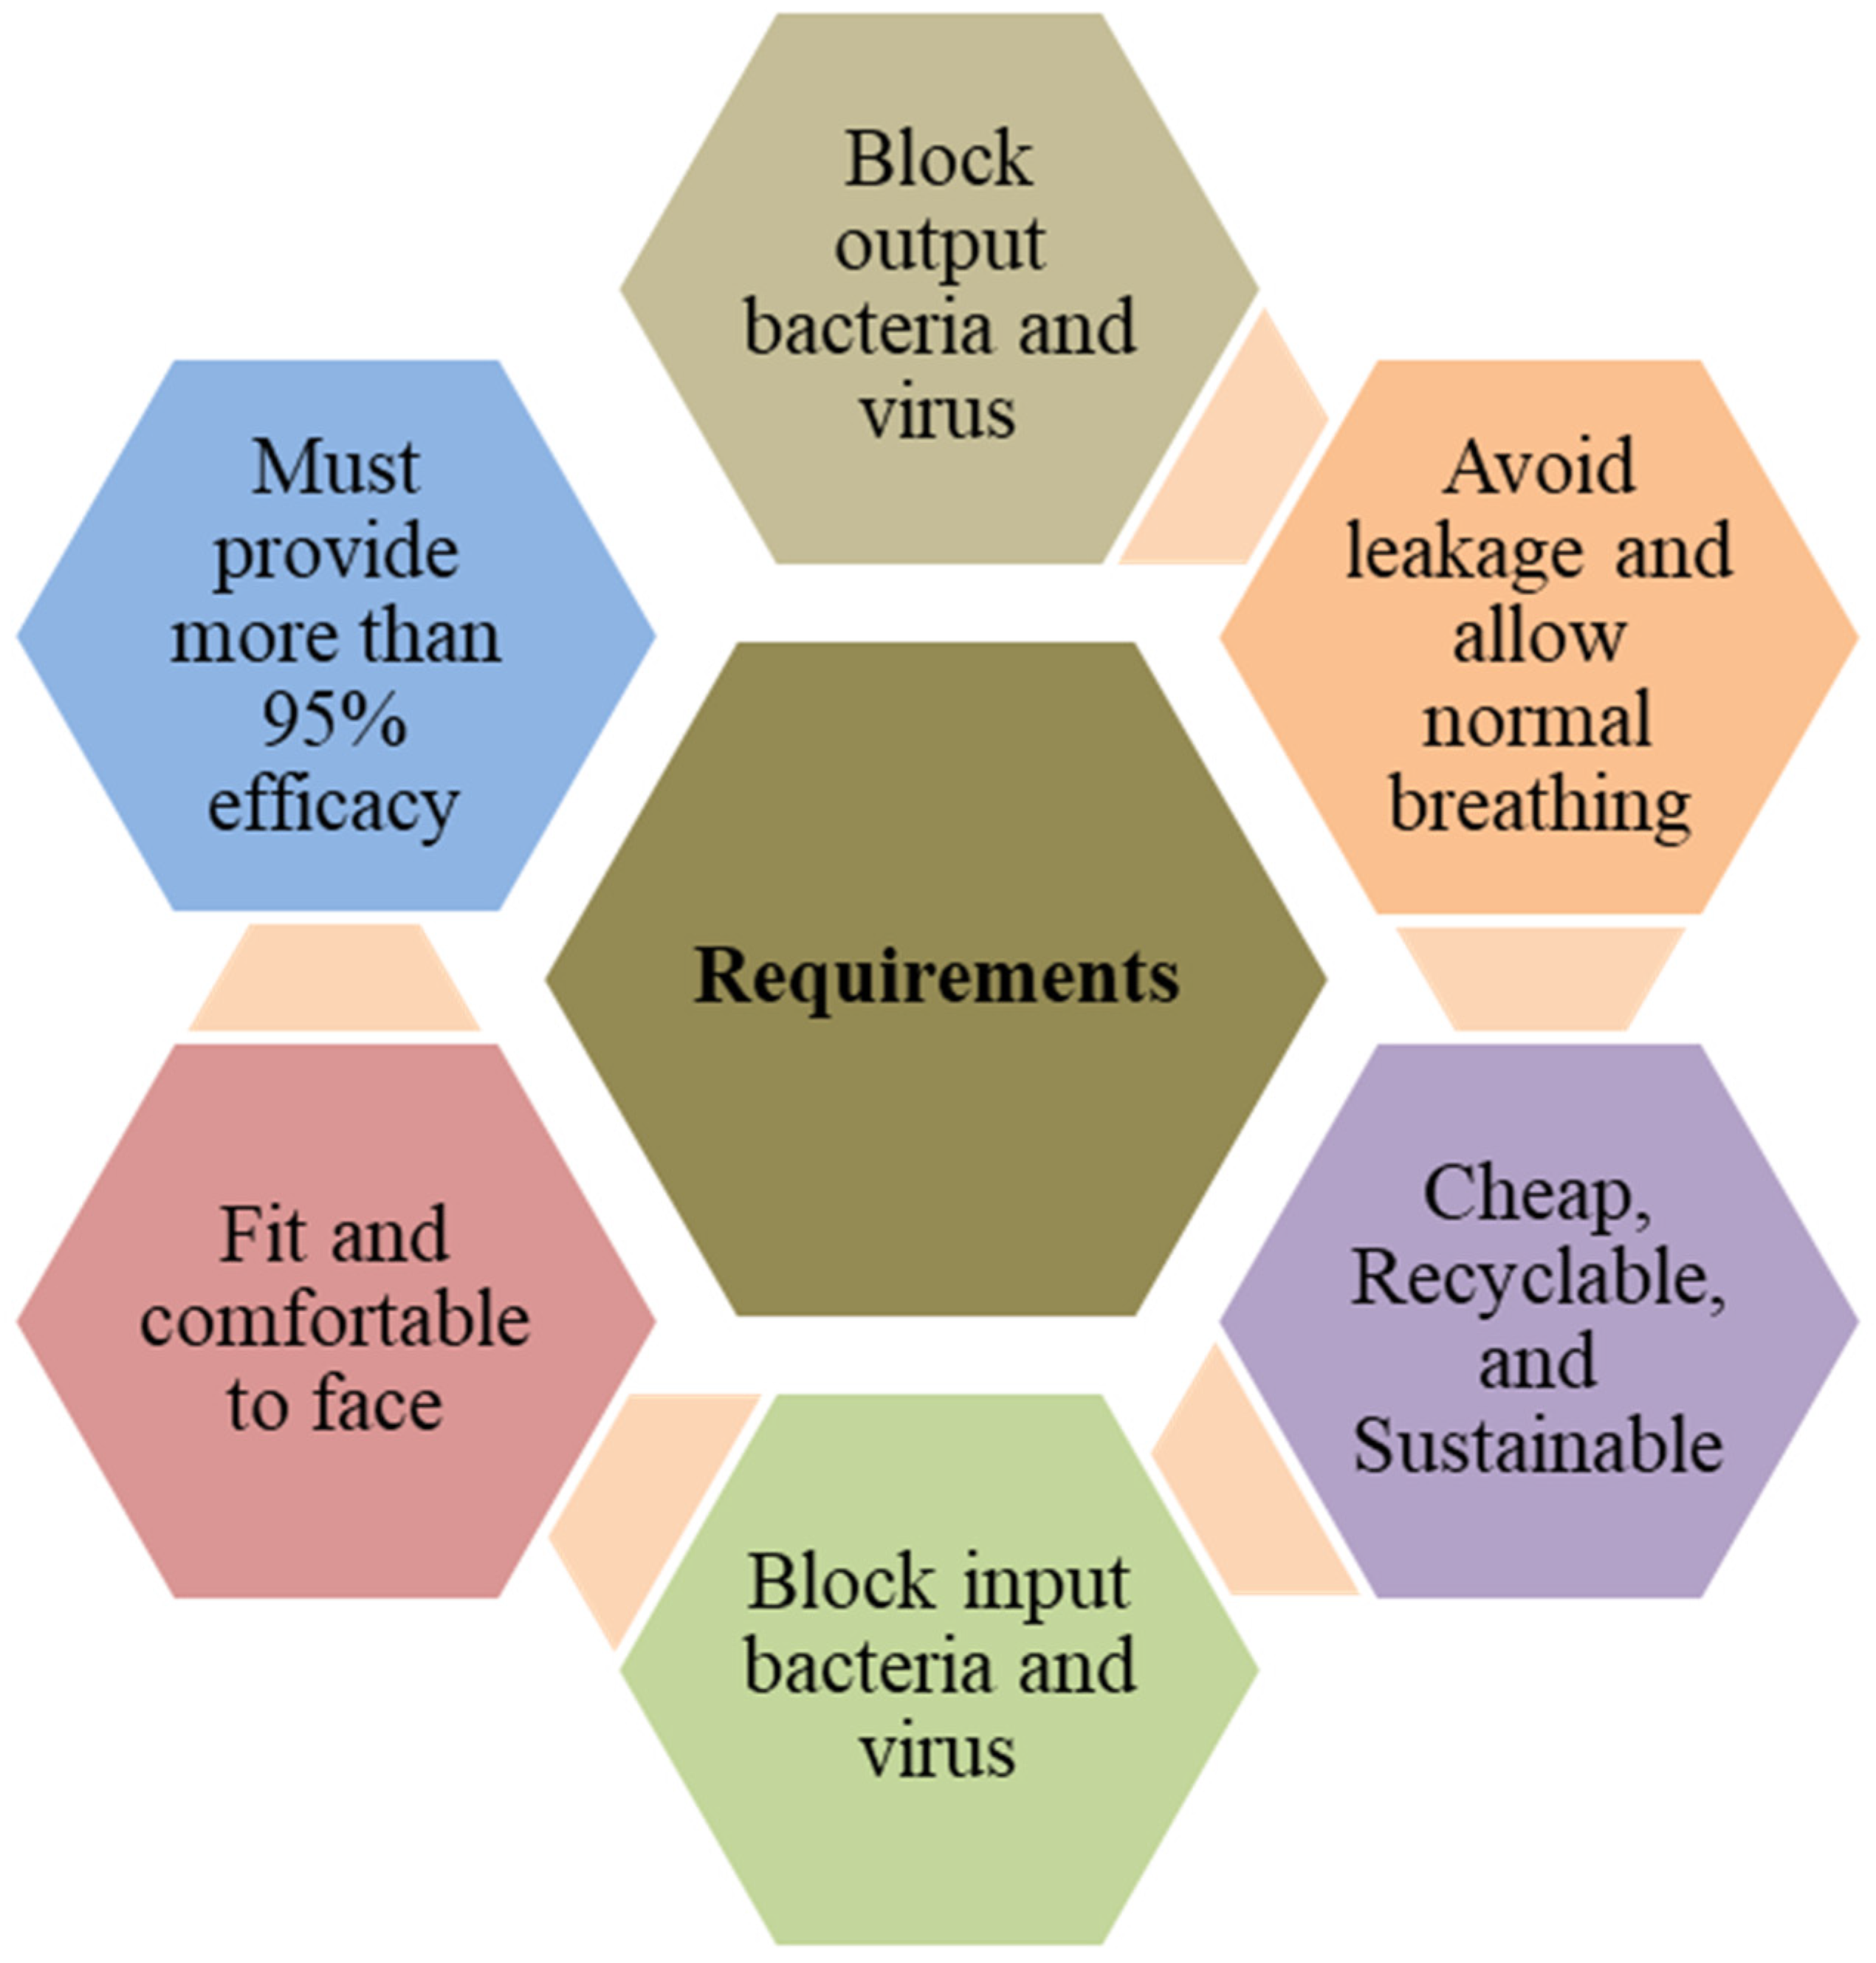 Polymers Free Full-Text | Face Masks to Combat (COVID-19)&mdash;Processing, Roles, Requirements, Efficacy, Risk and Sustainability